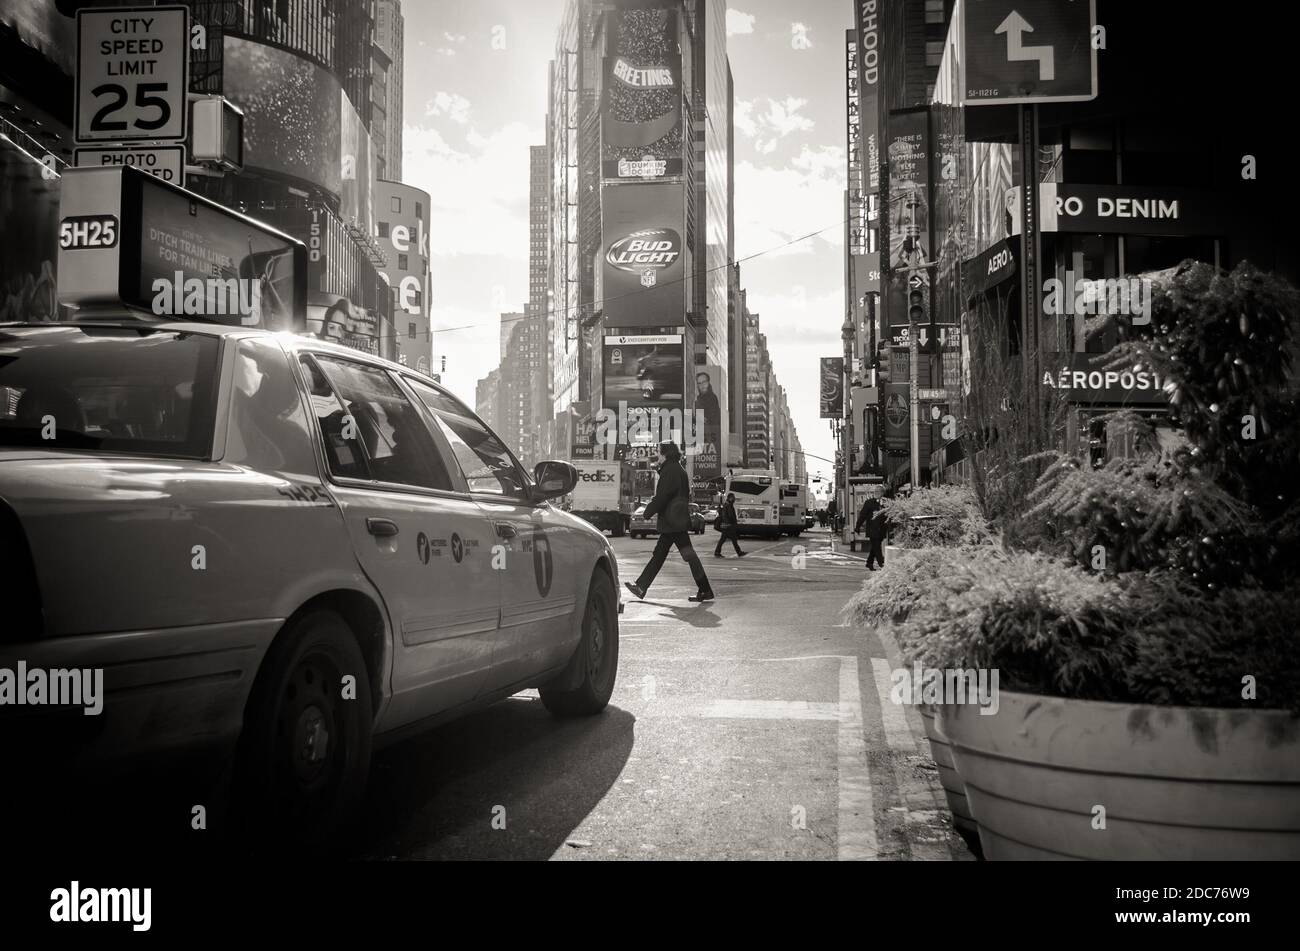 Manhattan Times Square View in Black and White. A Man is Crossing the Road in Front of a Cab. District Full of LED Screens and Advertisements. Stock Photo